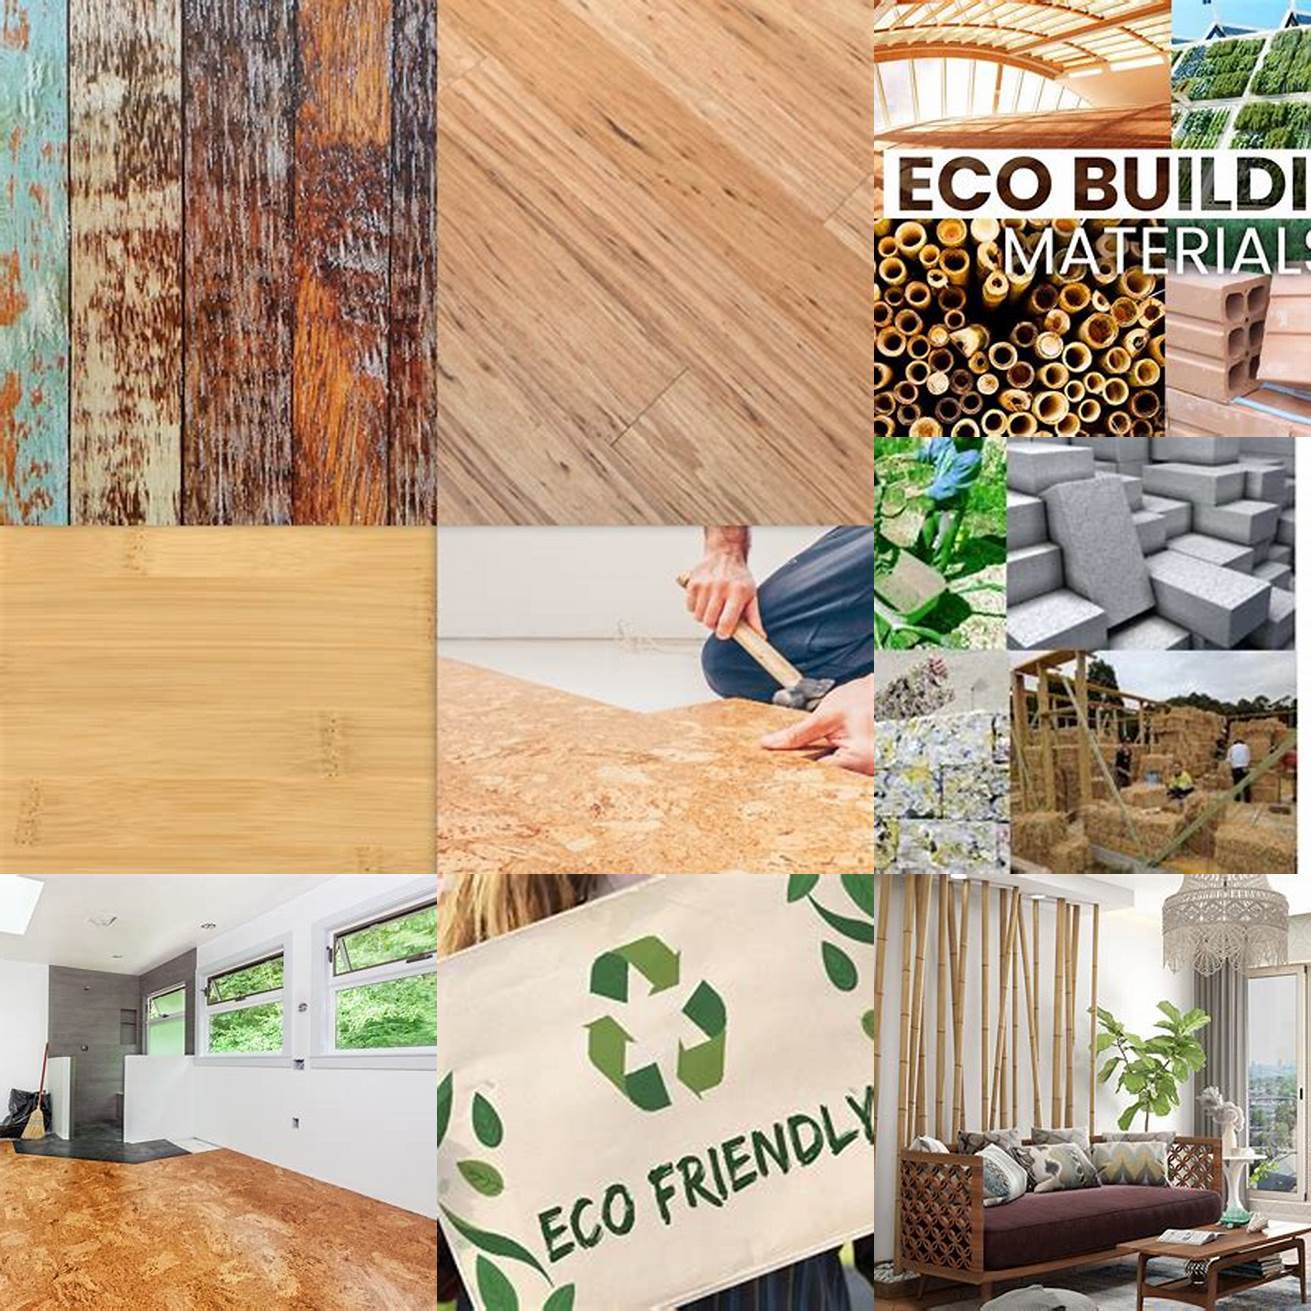 2 Consider sustainability and eco-friendliness Choose materials and finishes that are environmentally friendly such as bamboo flooring or recycled glass countertops